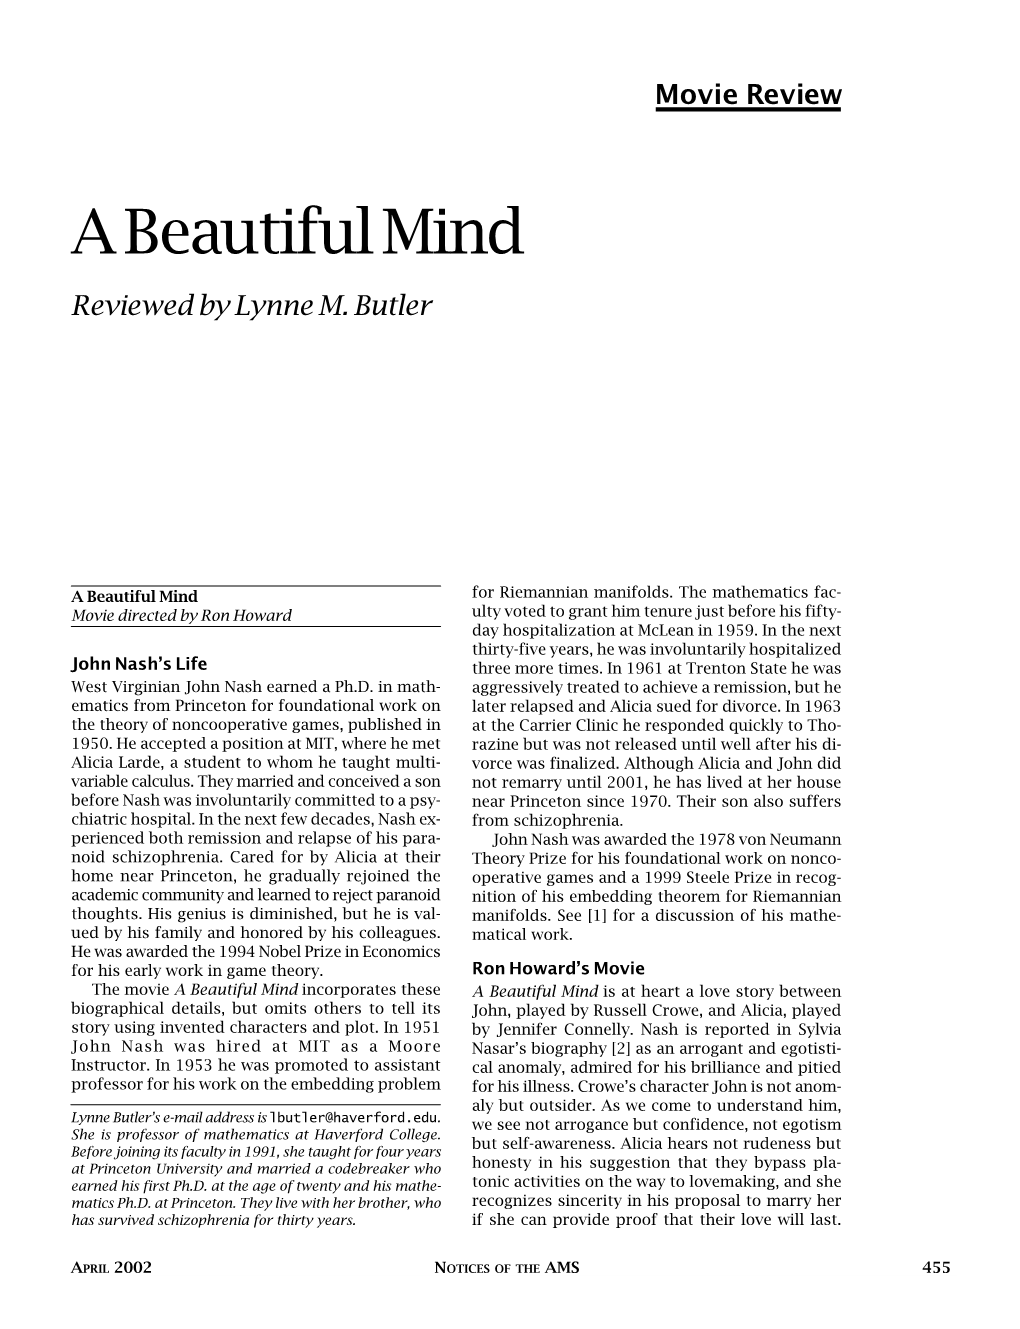 Movie Review: a Beautiful Mind, Volume 49, Number 4